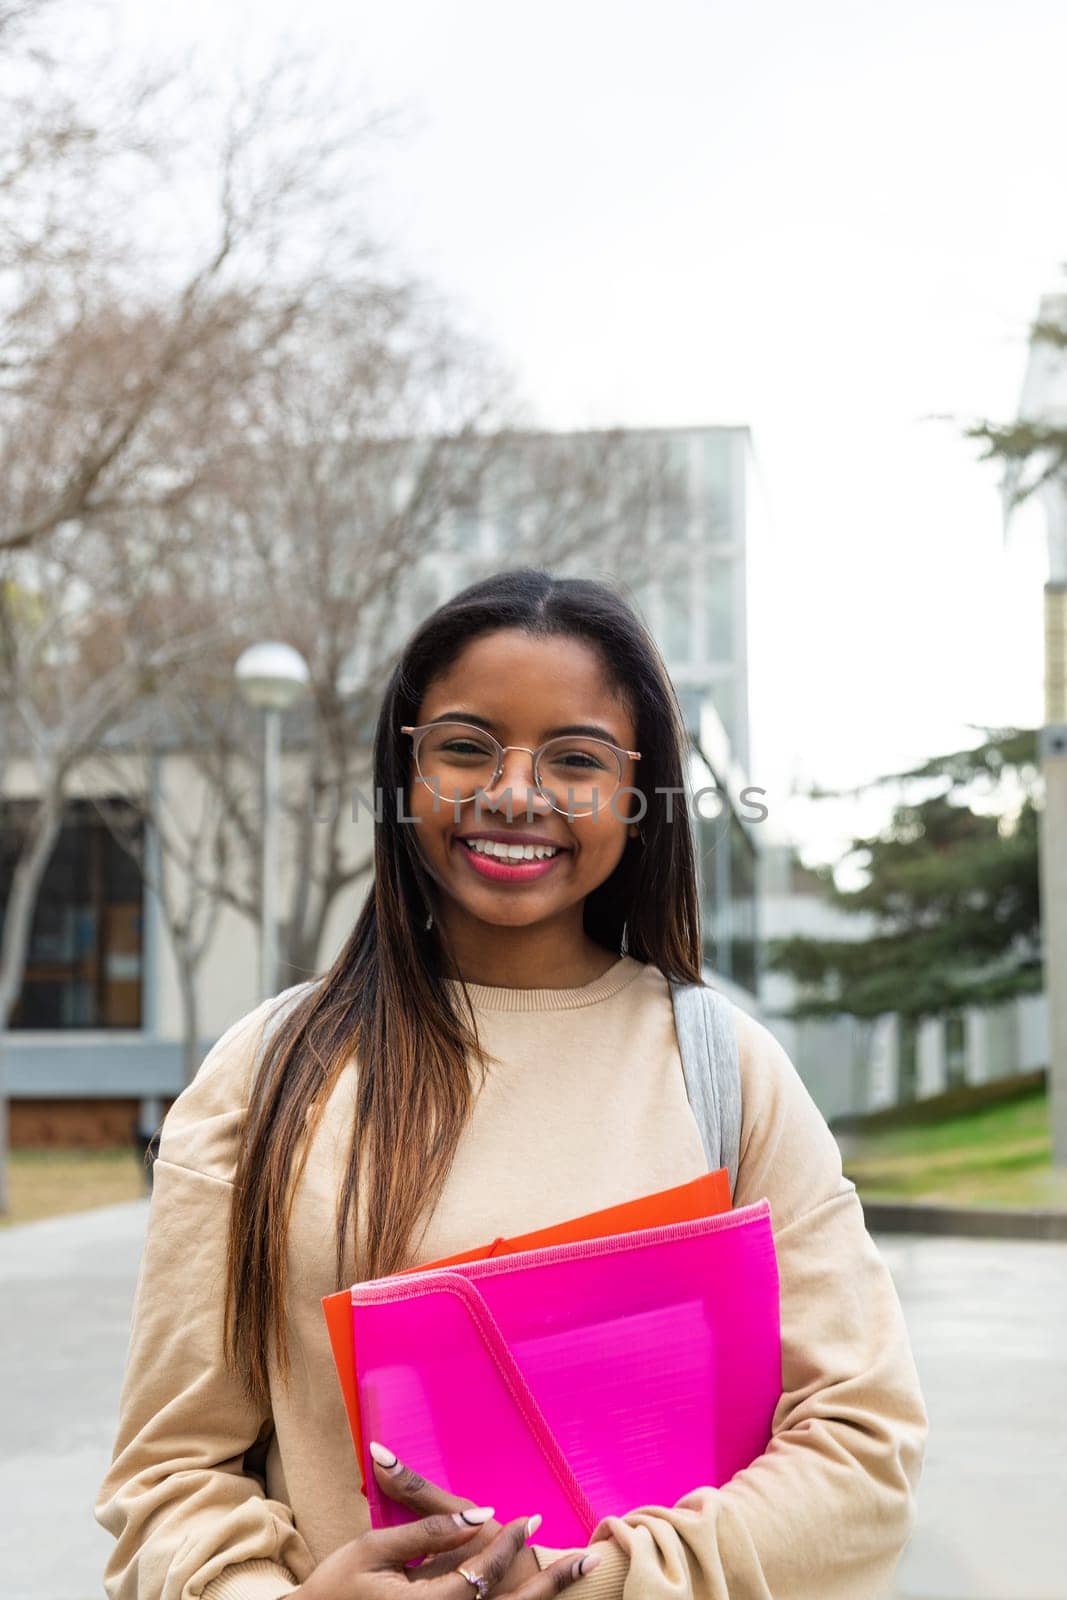 Vertical portrait of happy young black female college student with glasses looking at camera. Copy space. by Hoverstock